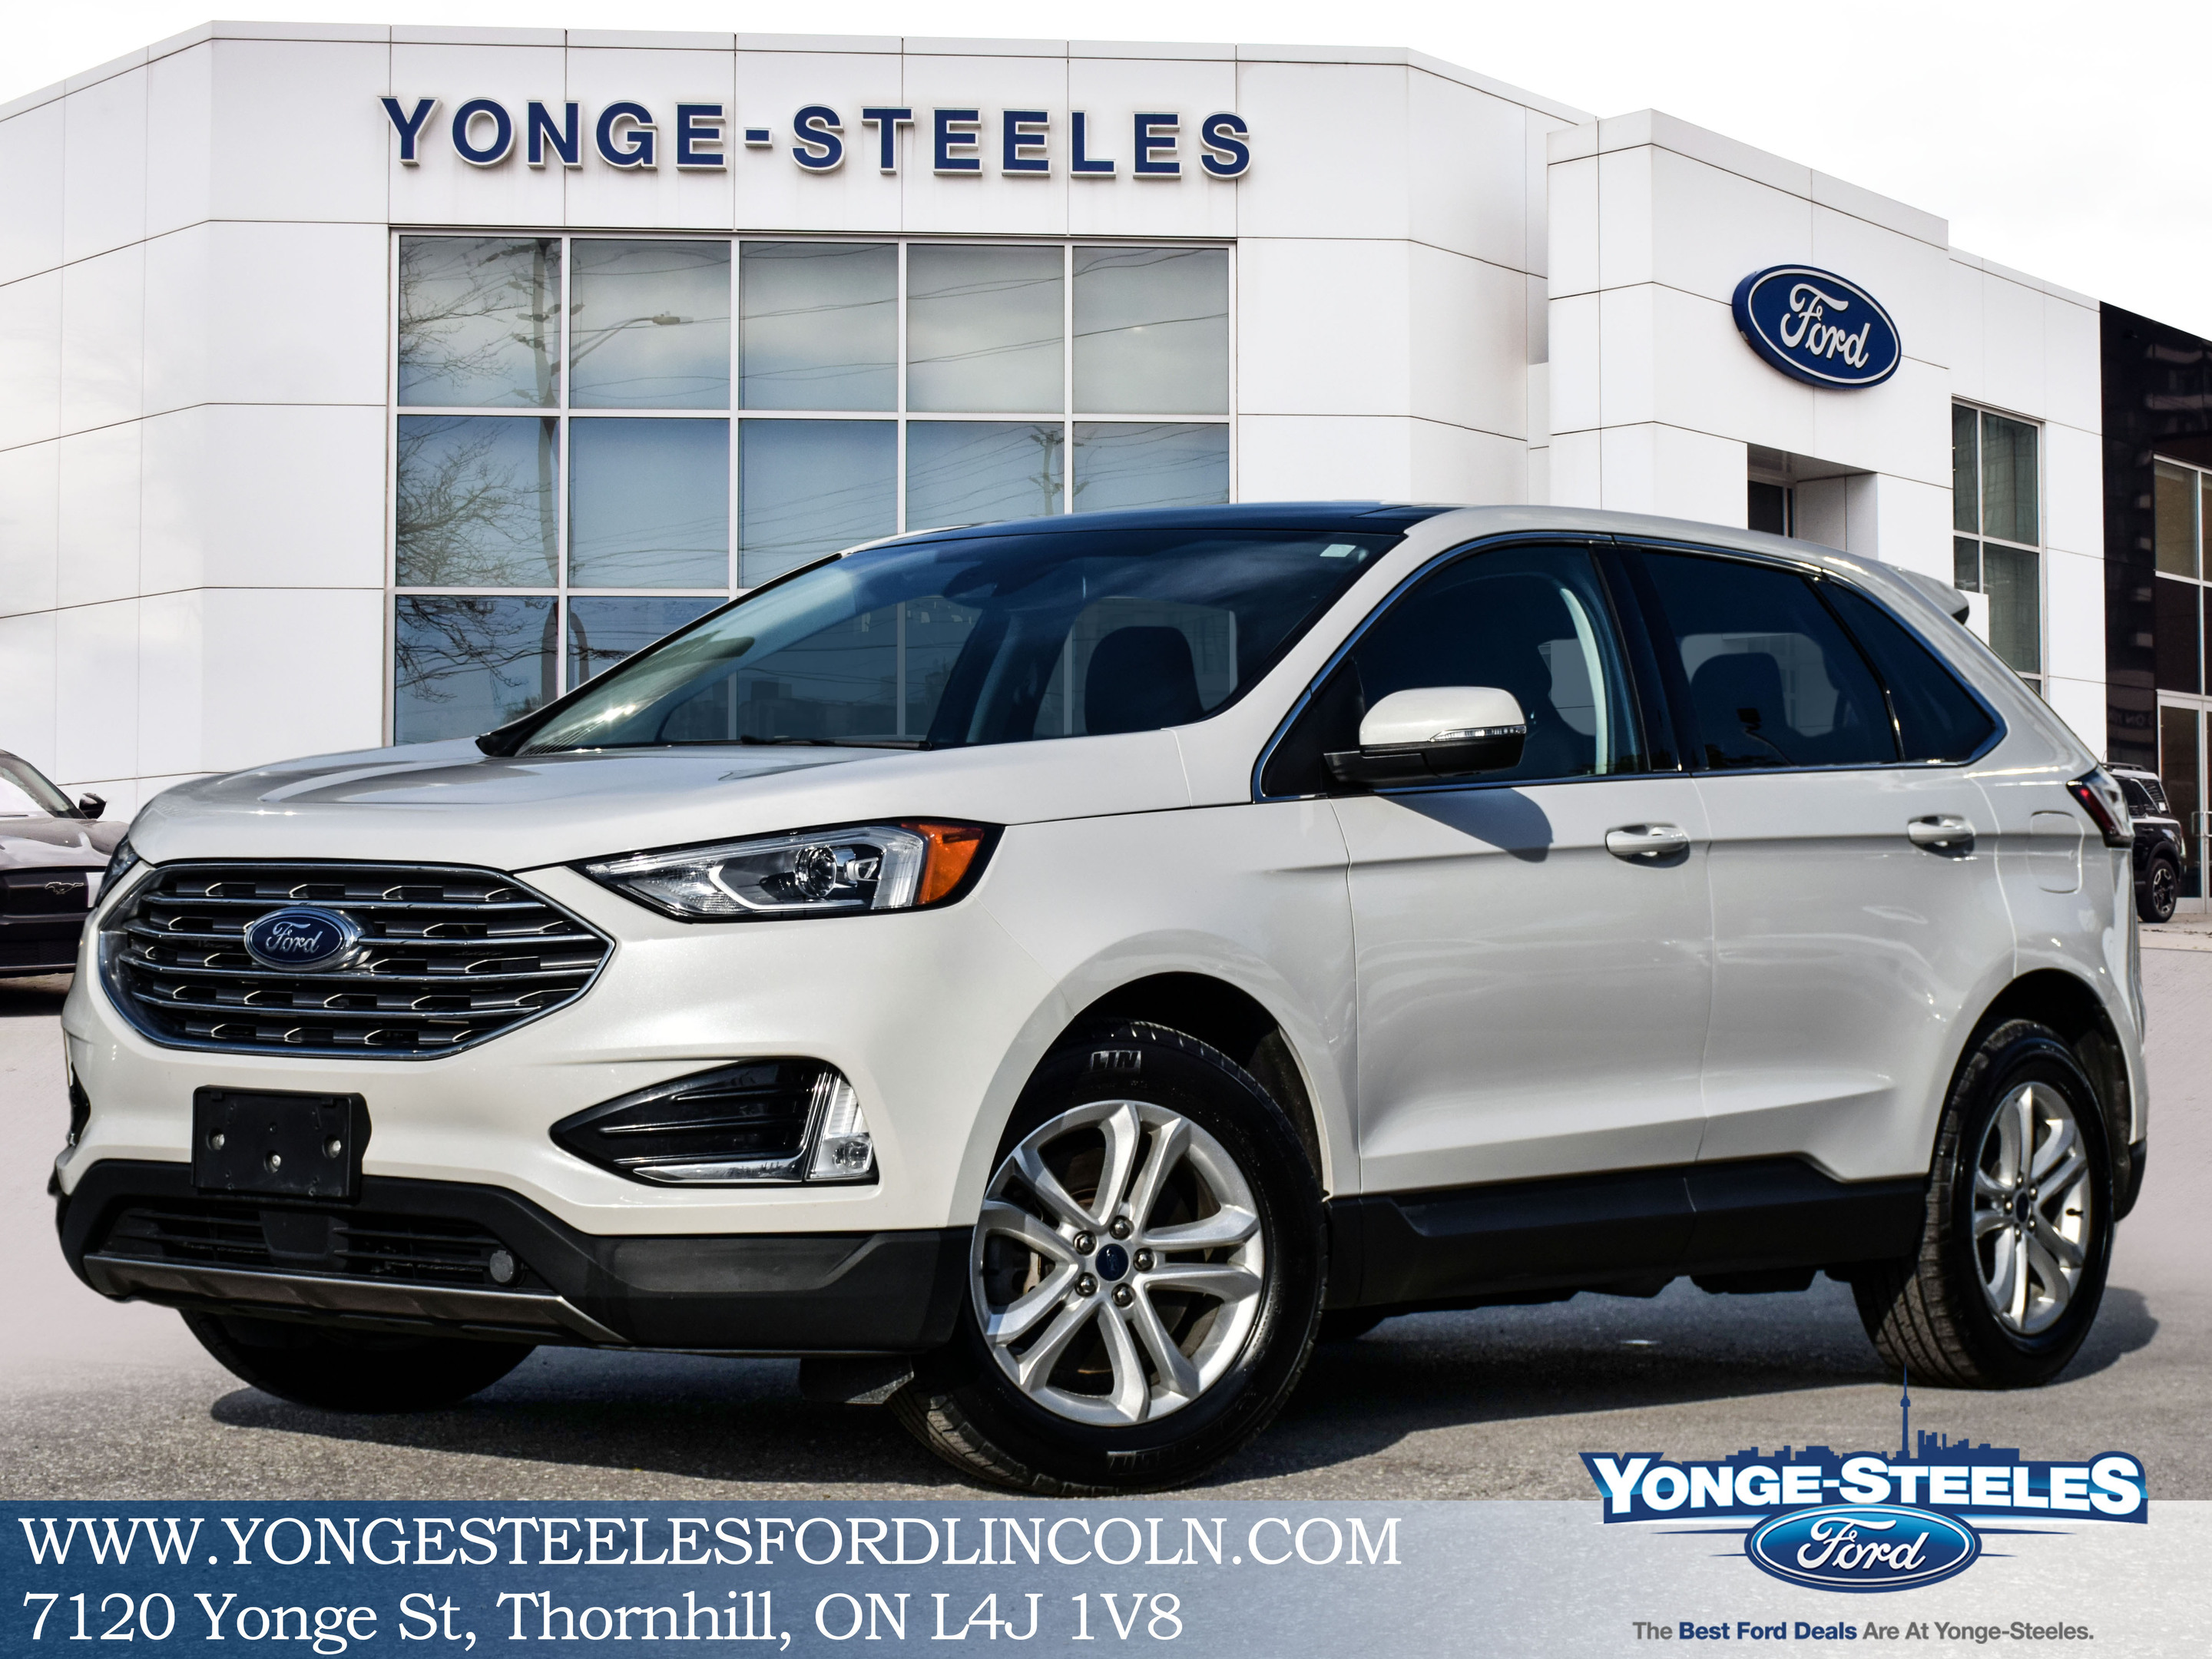 2020 Ford Edge SEL AWD 2.OL NO ACCIDENT COLD WEATHER PKG